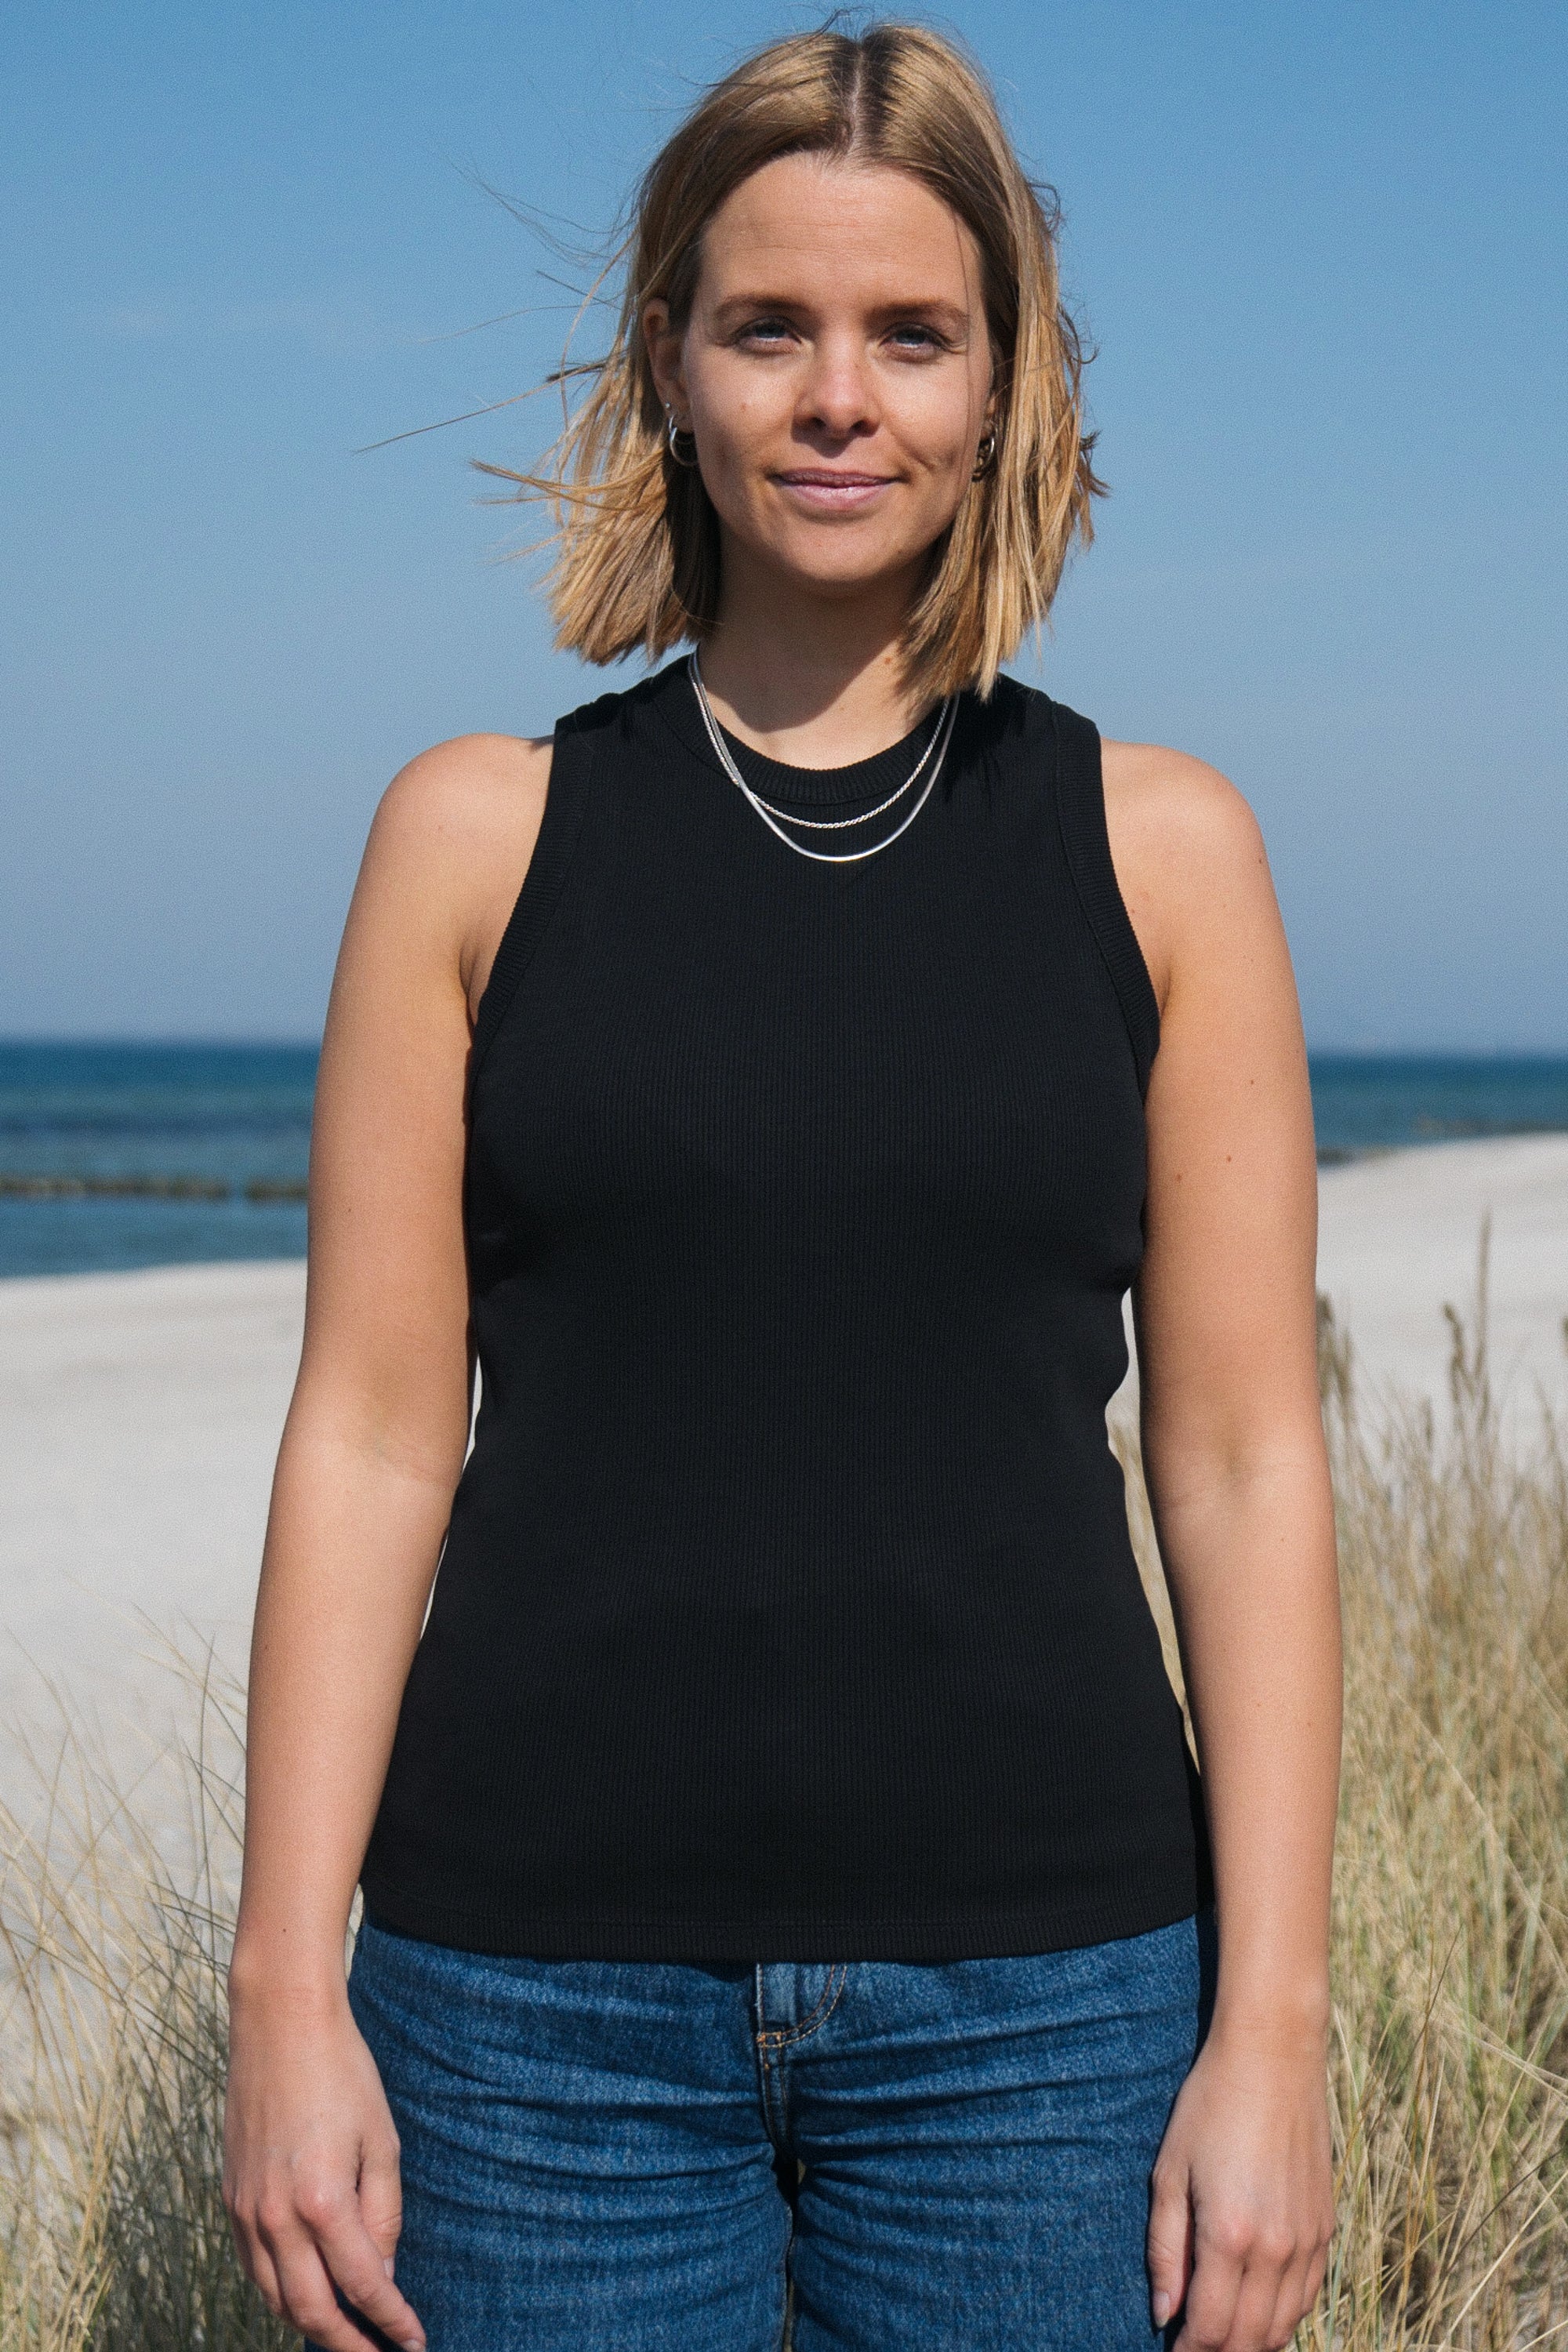 Top Alva in black by Salzwasser made from organic cotton